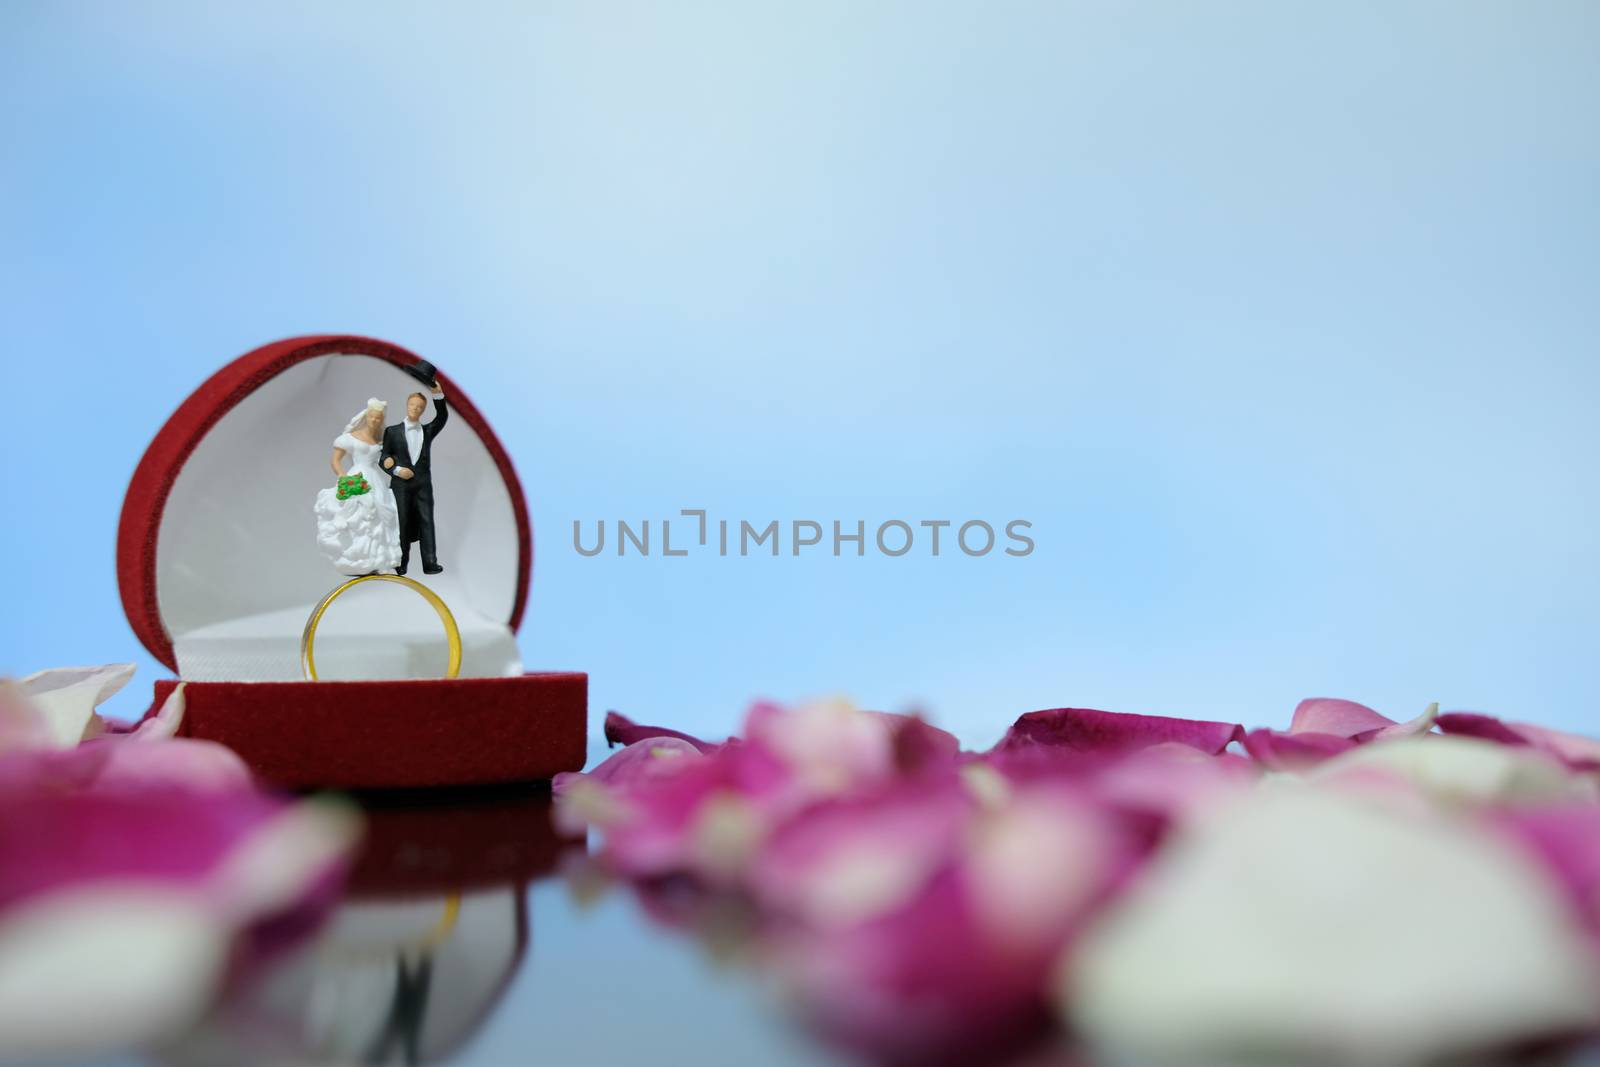 Miniature photography outdoor marriage wedding concept, bride and groom standing above opened ring box on red white rose flower pile by Macrostud